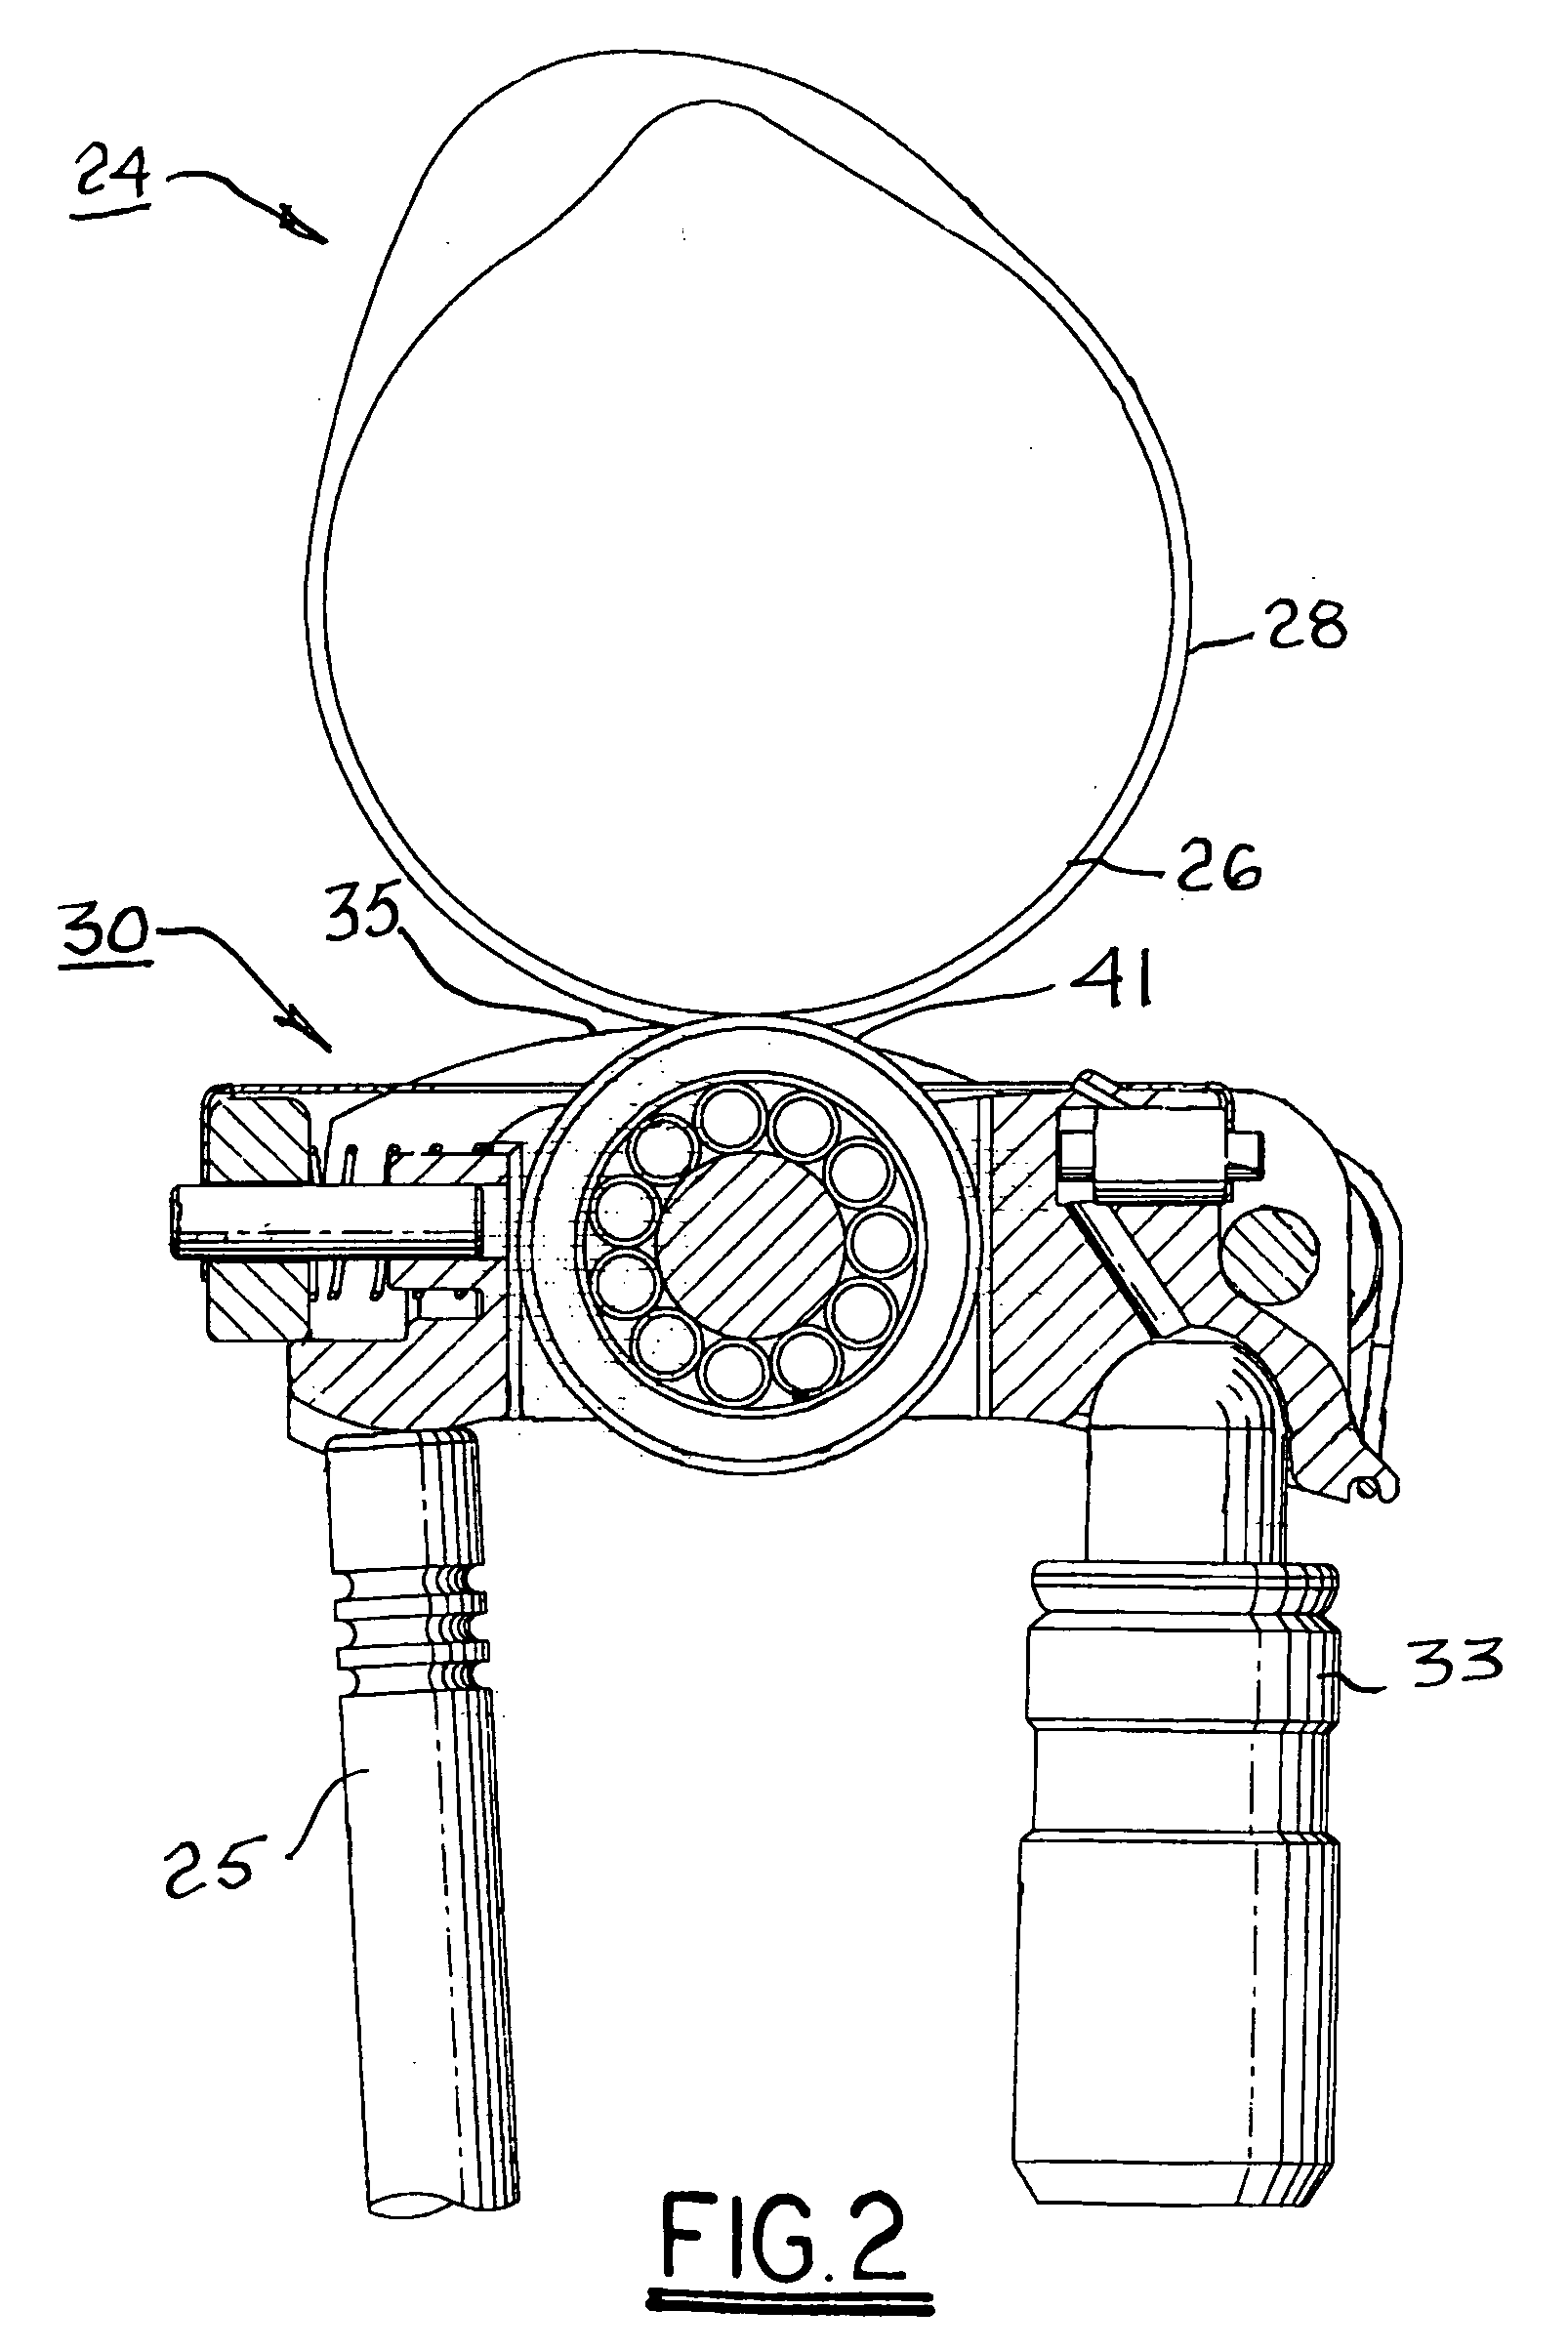 Method and apparatus for optimized combustion in an internal combustion engine utilizing homogeneous charge compression ignition and variable valve actuation